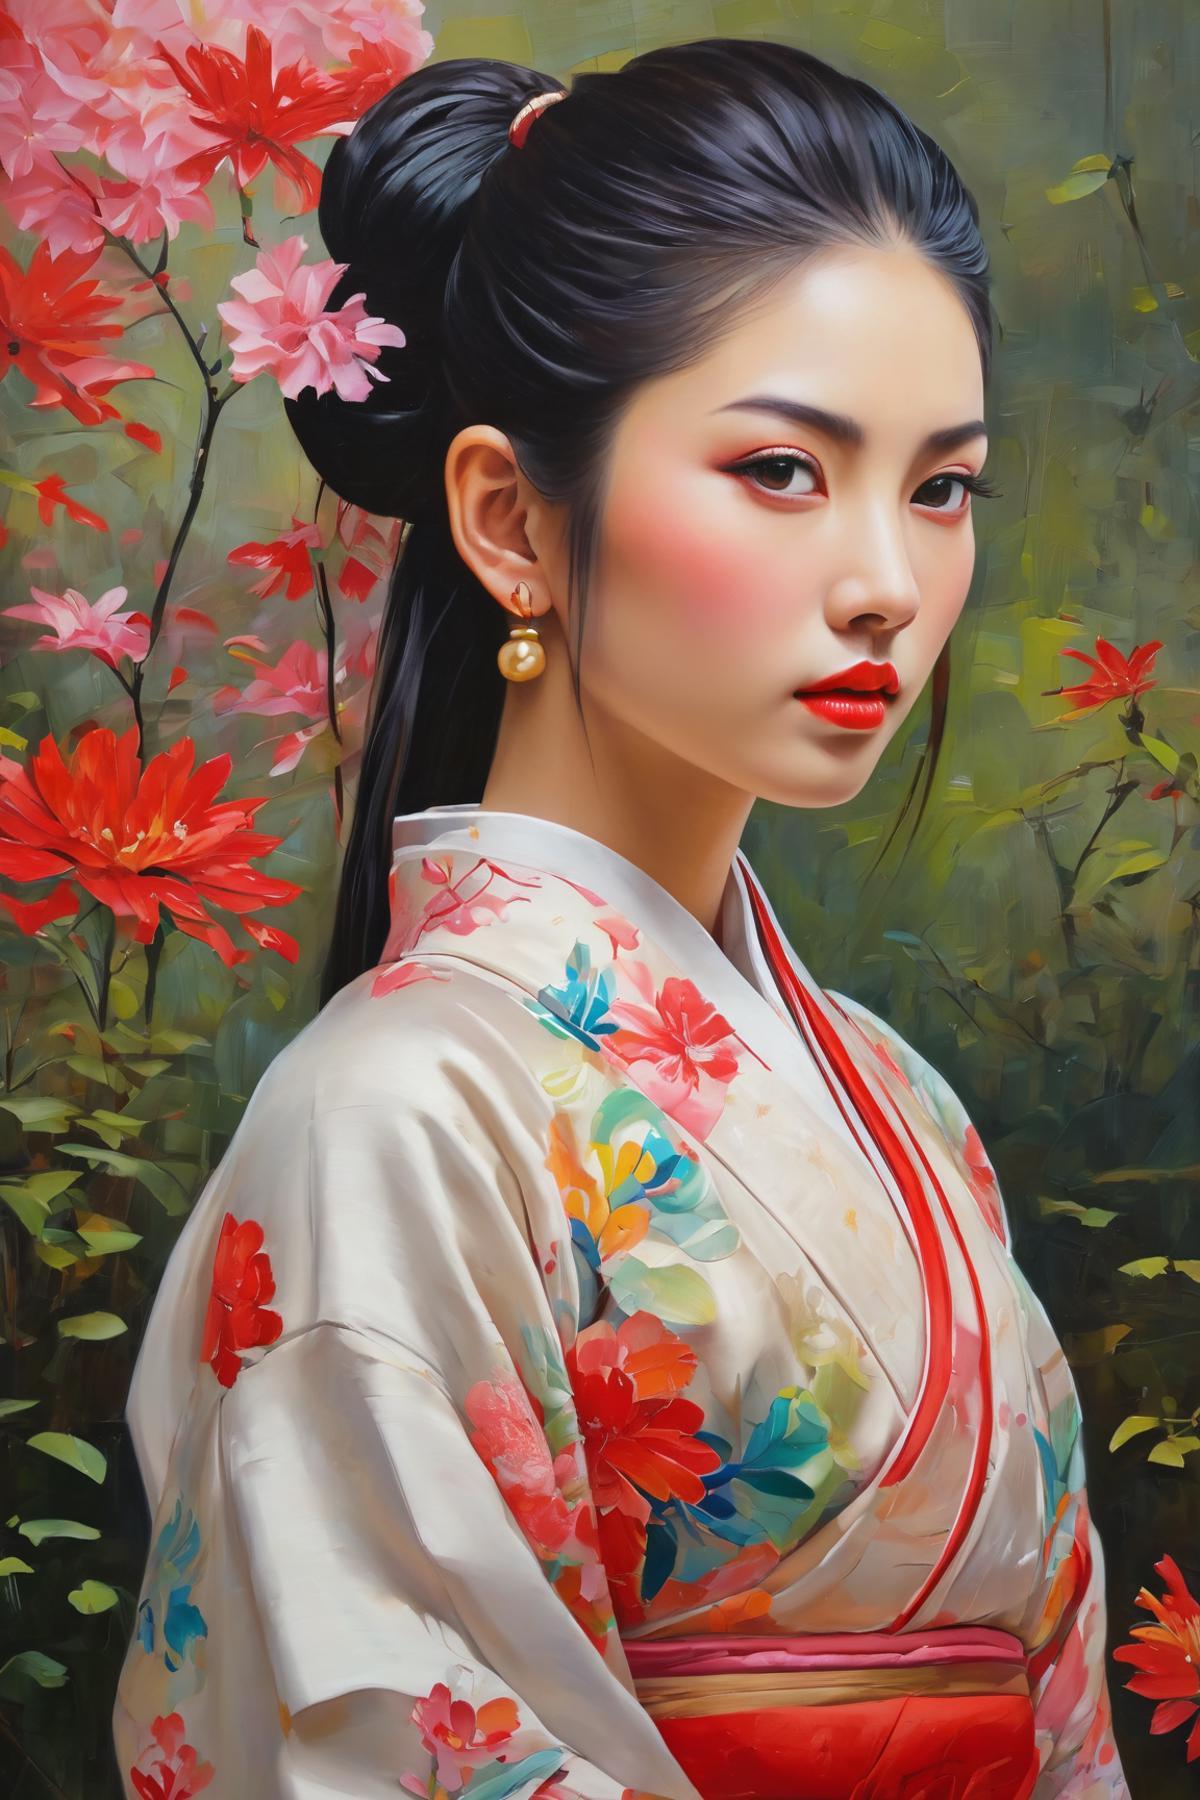 "A Geisha's Portrait: A Woman in a White Kimono with Red Flowers and Pink Cheeks"